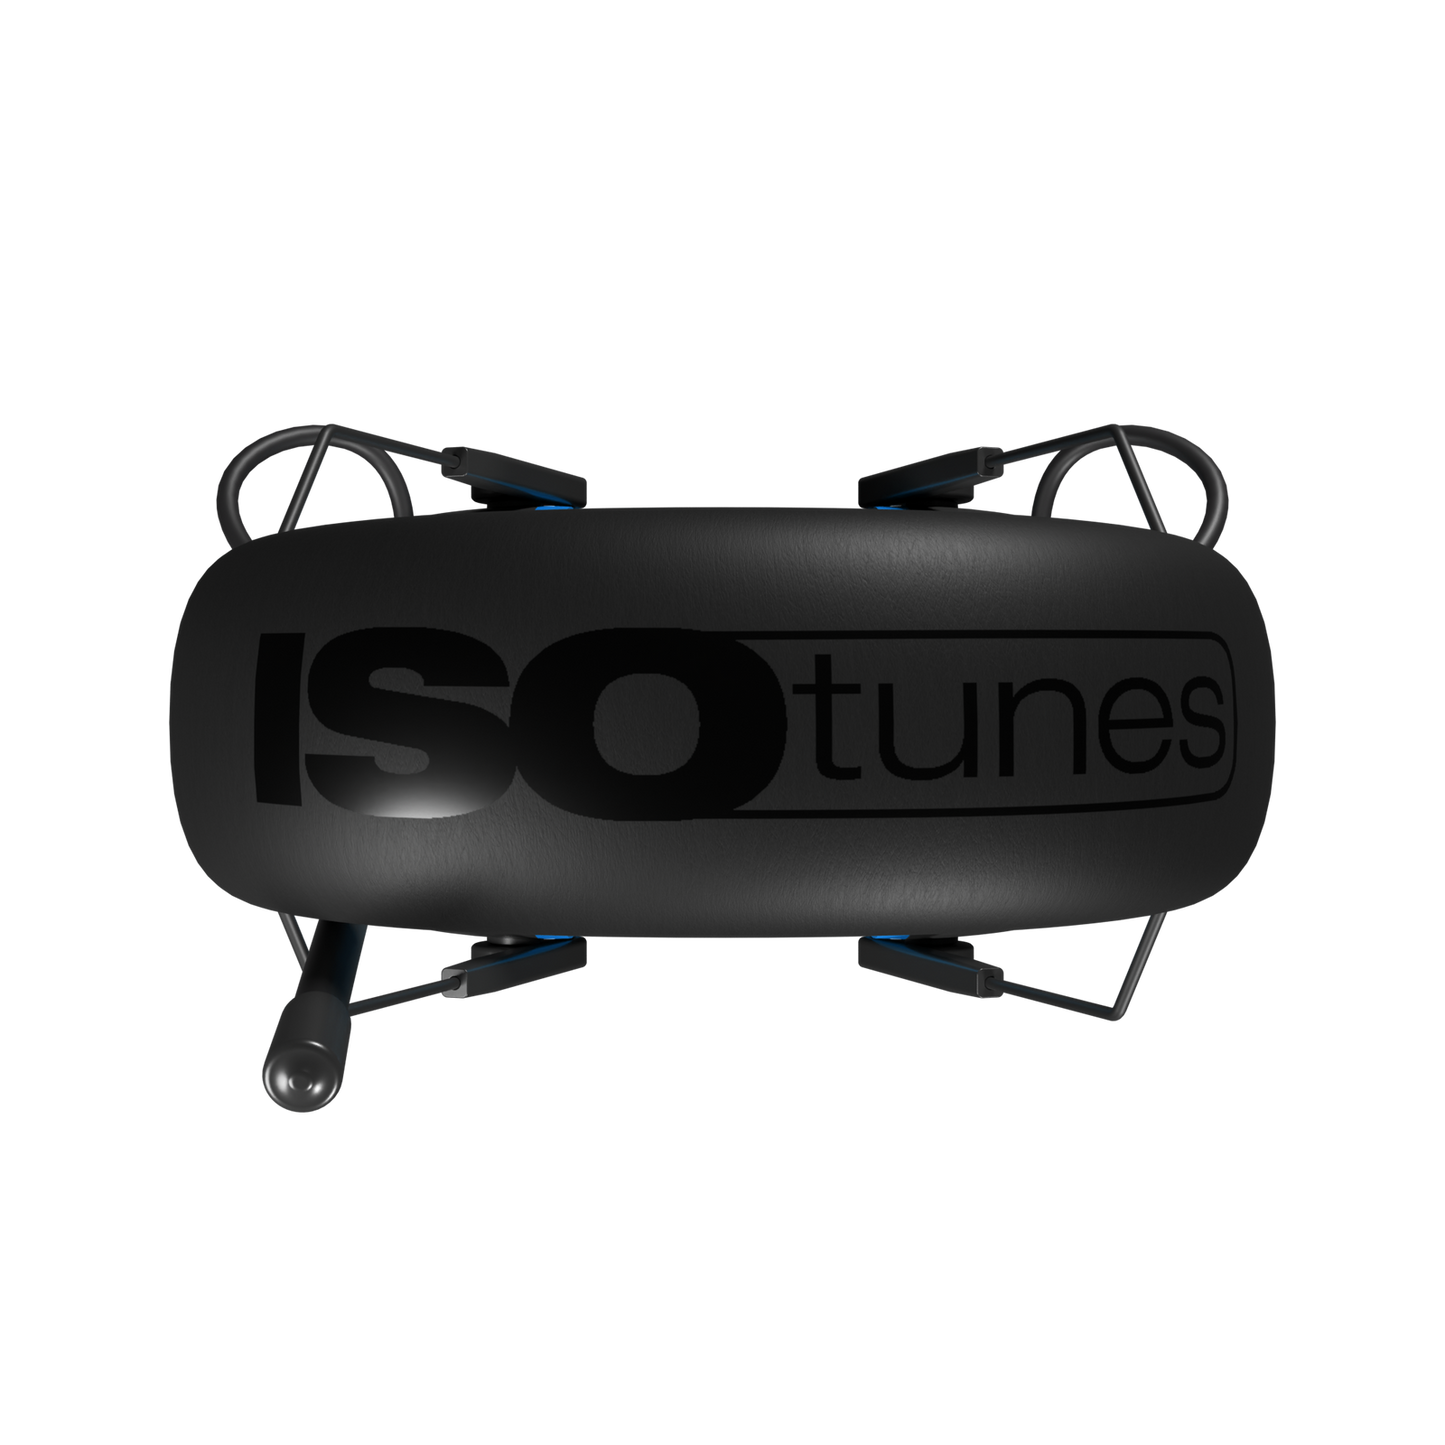 IsoTunes Wireless Safety Air Defender Safety Earmuffs with Bluetooth and AM/FM